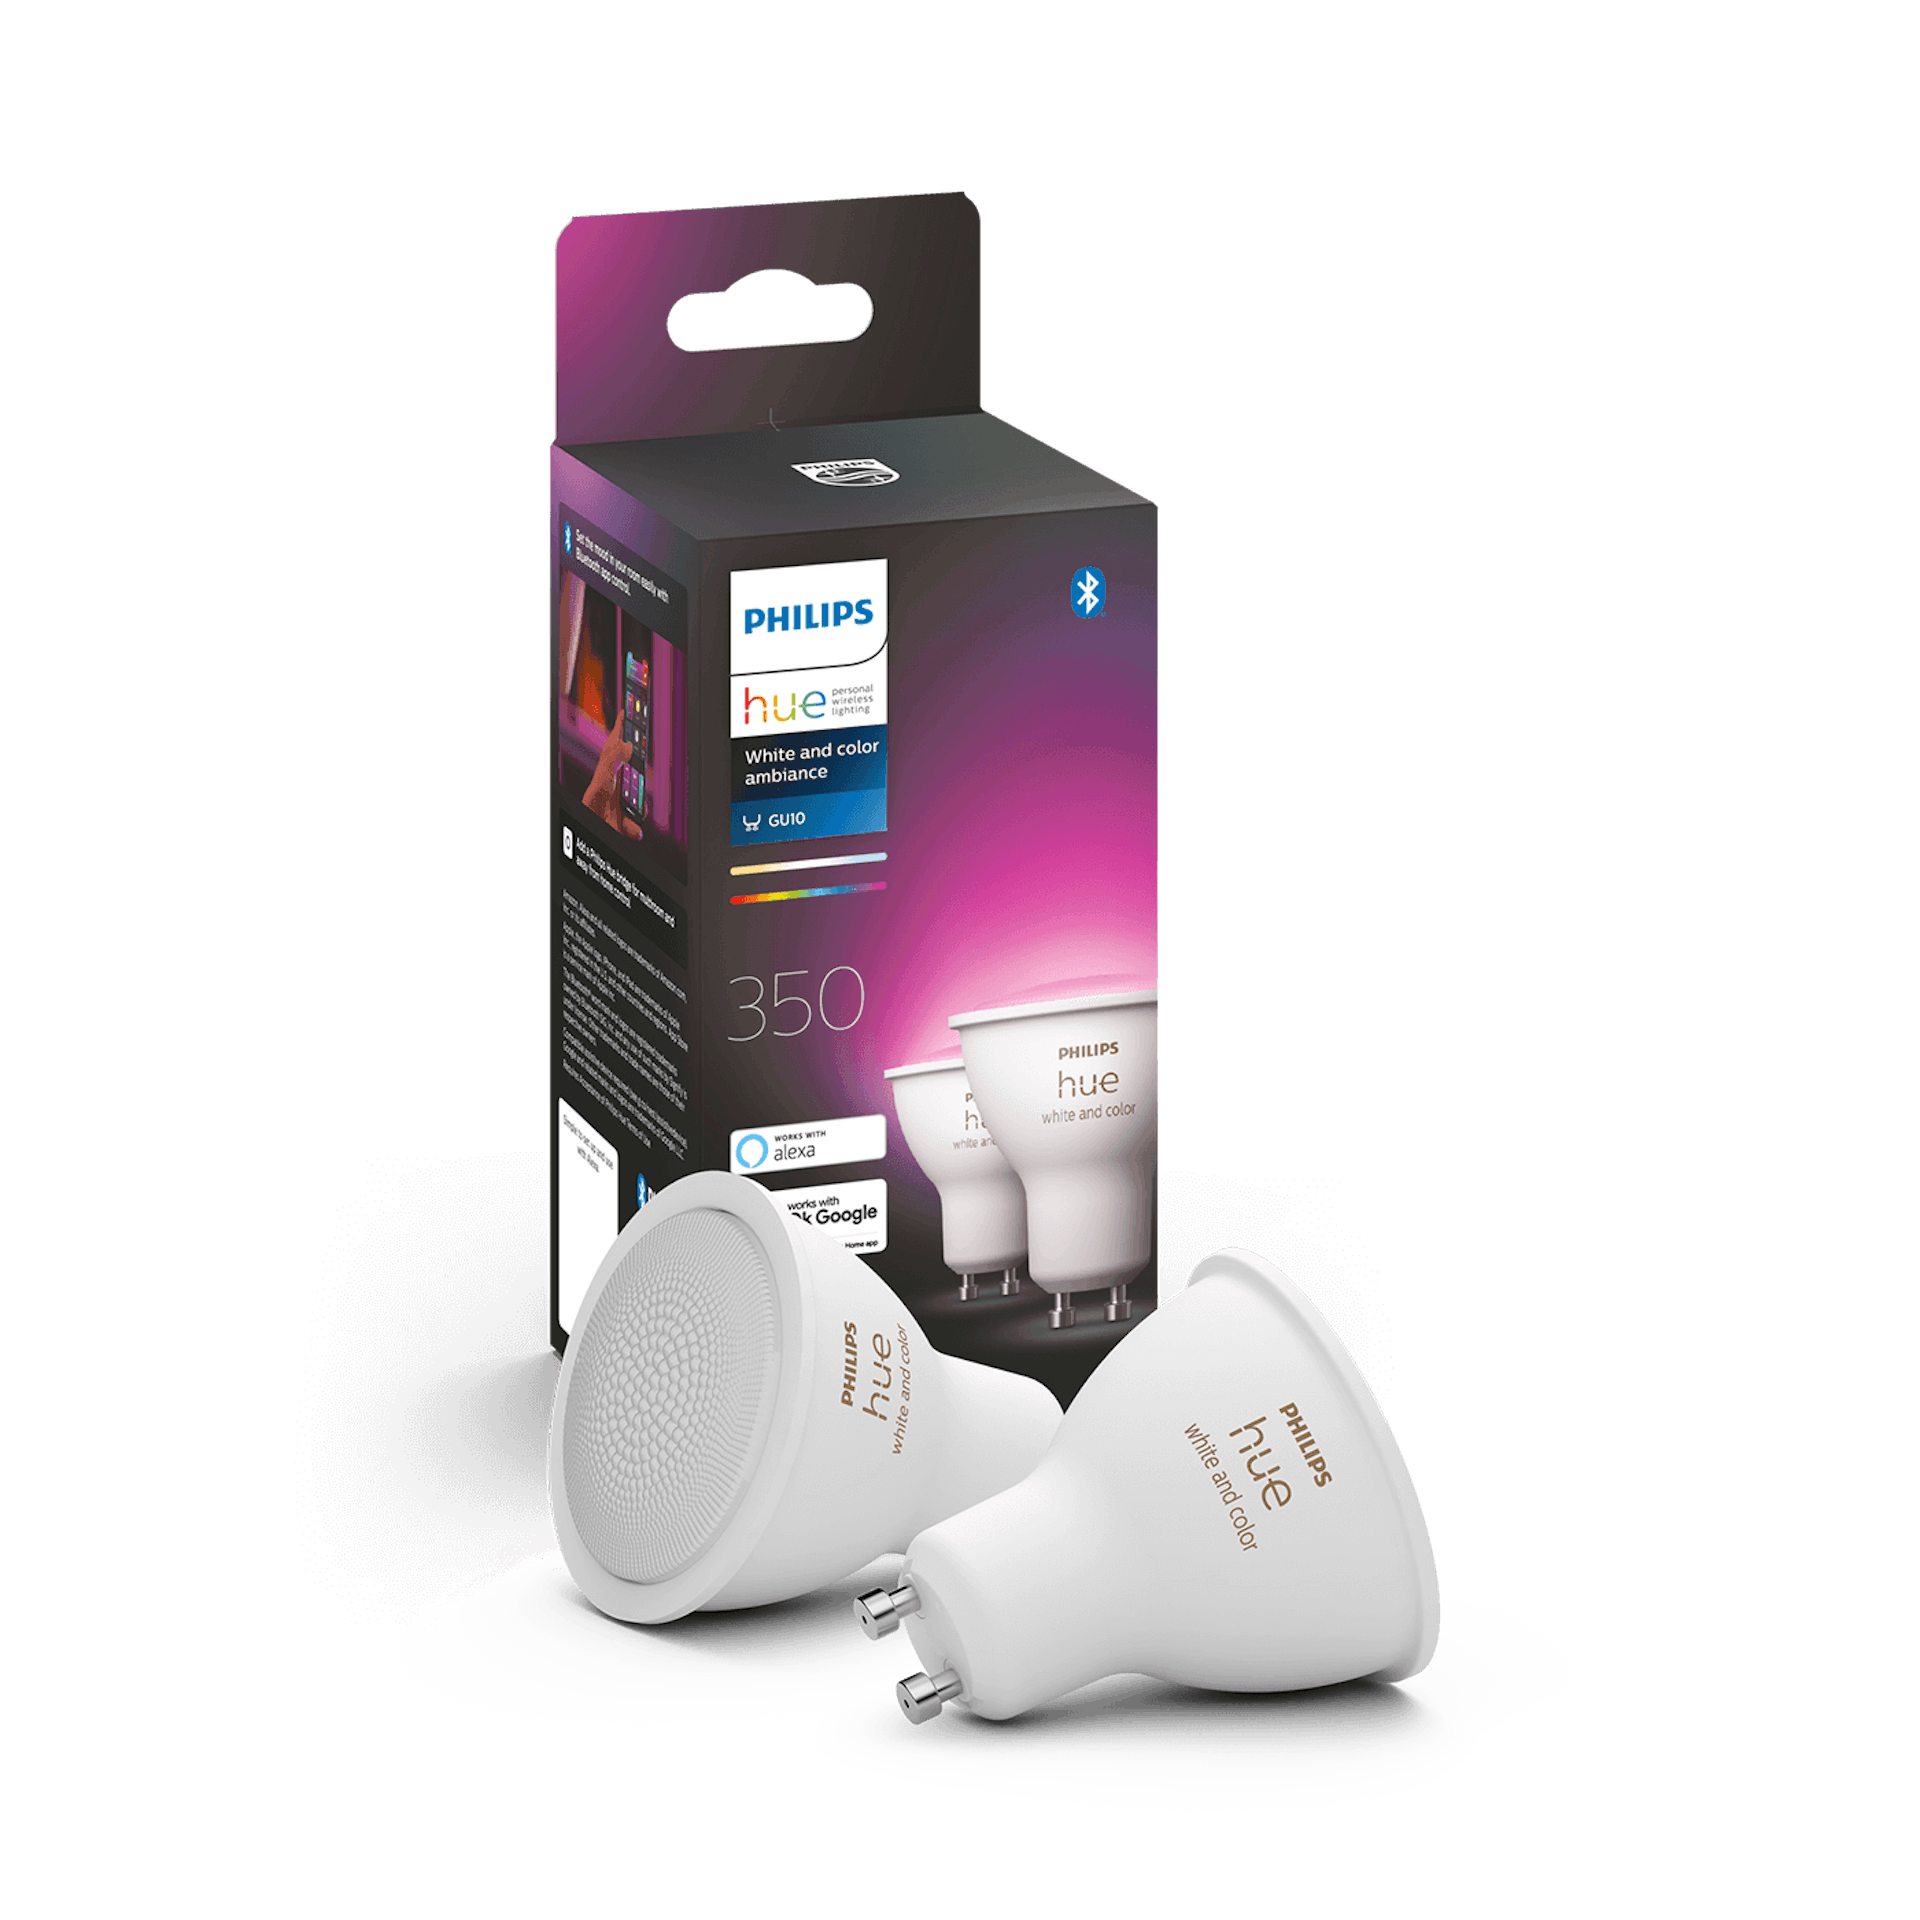 Philips Hue White/Color Ambiance GU10 (2-pack) (G2) - Details - Packaging image